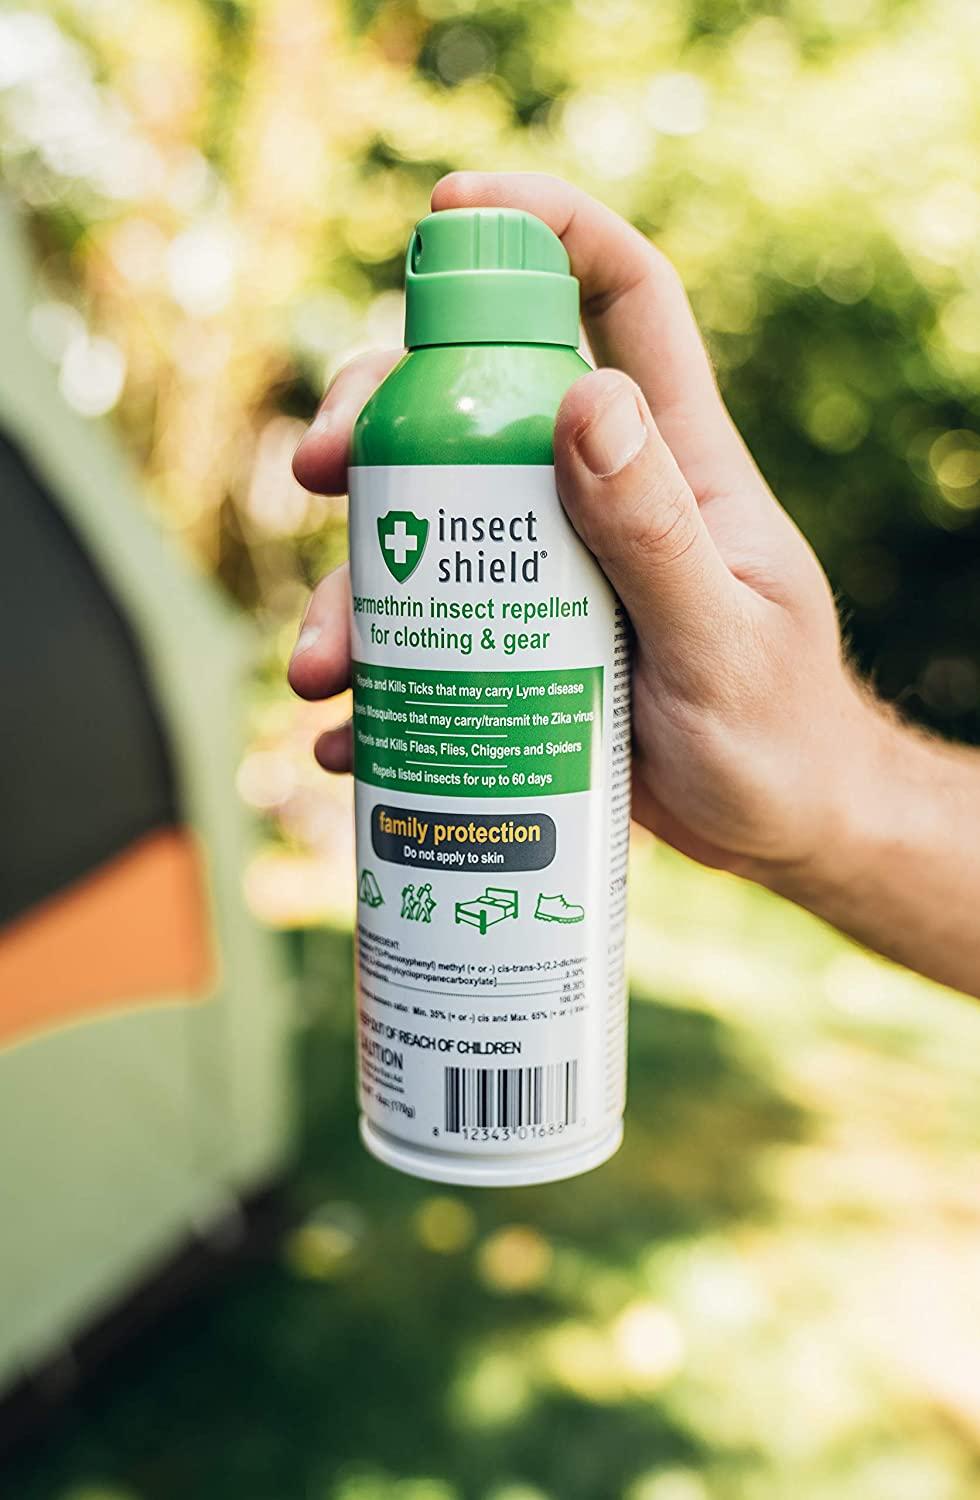 Insect Shield Premium Permethrin Spray Insect Repellent for